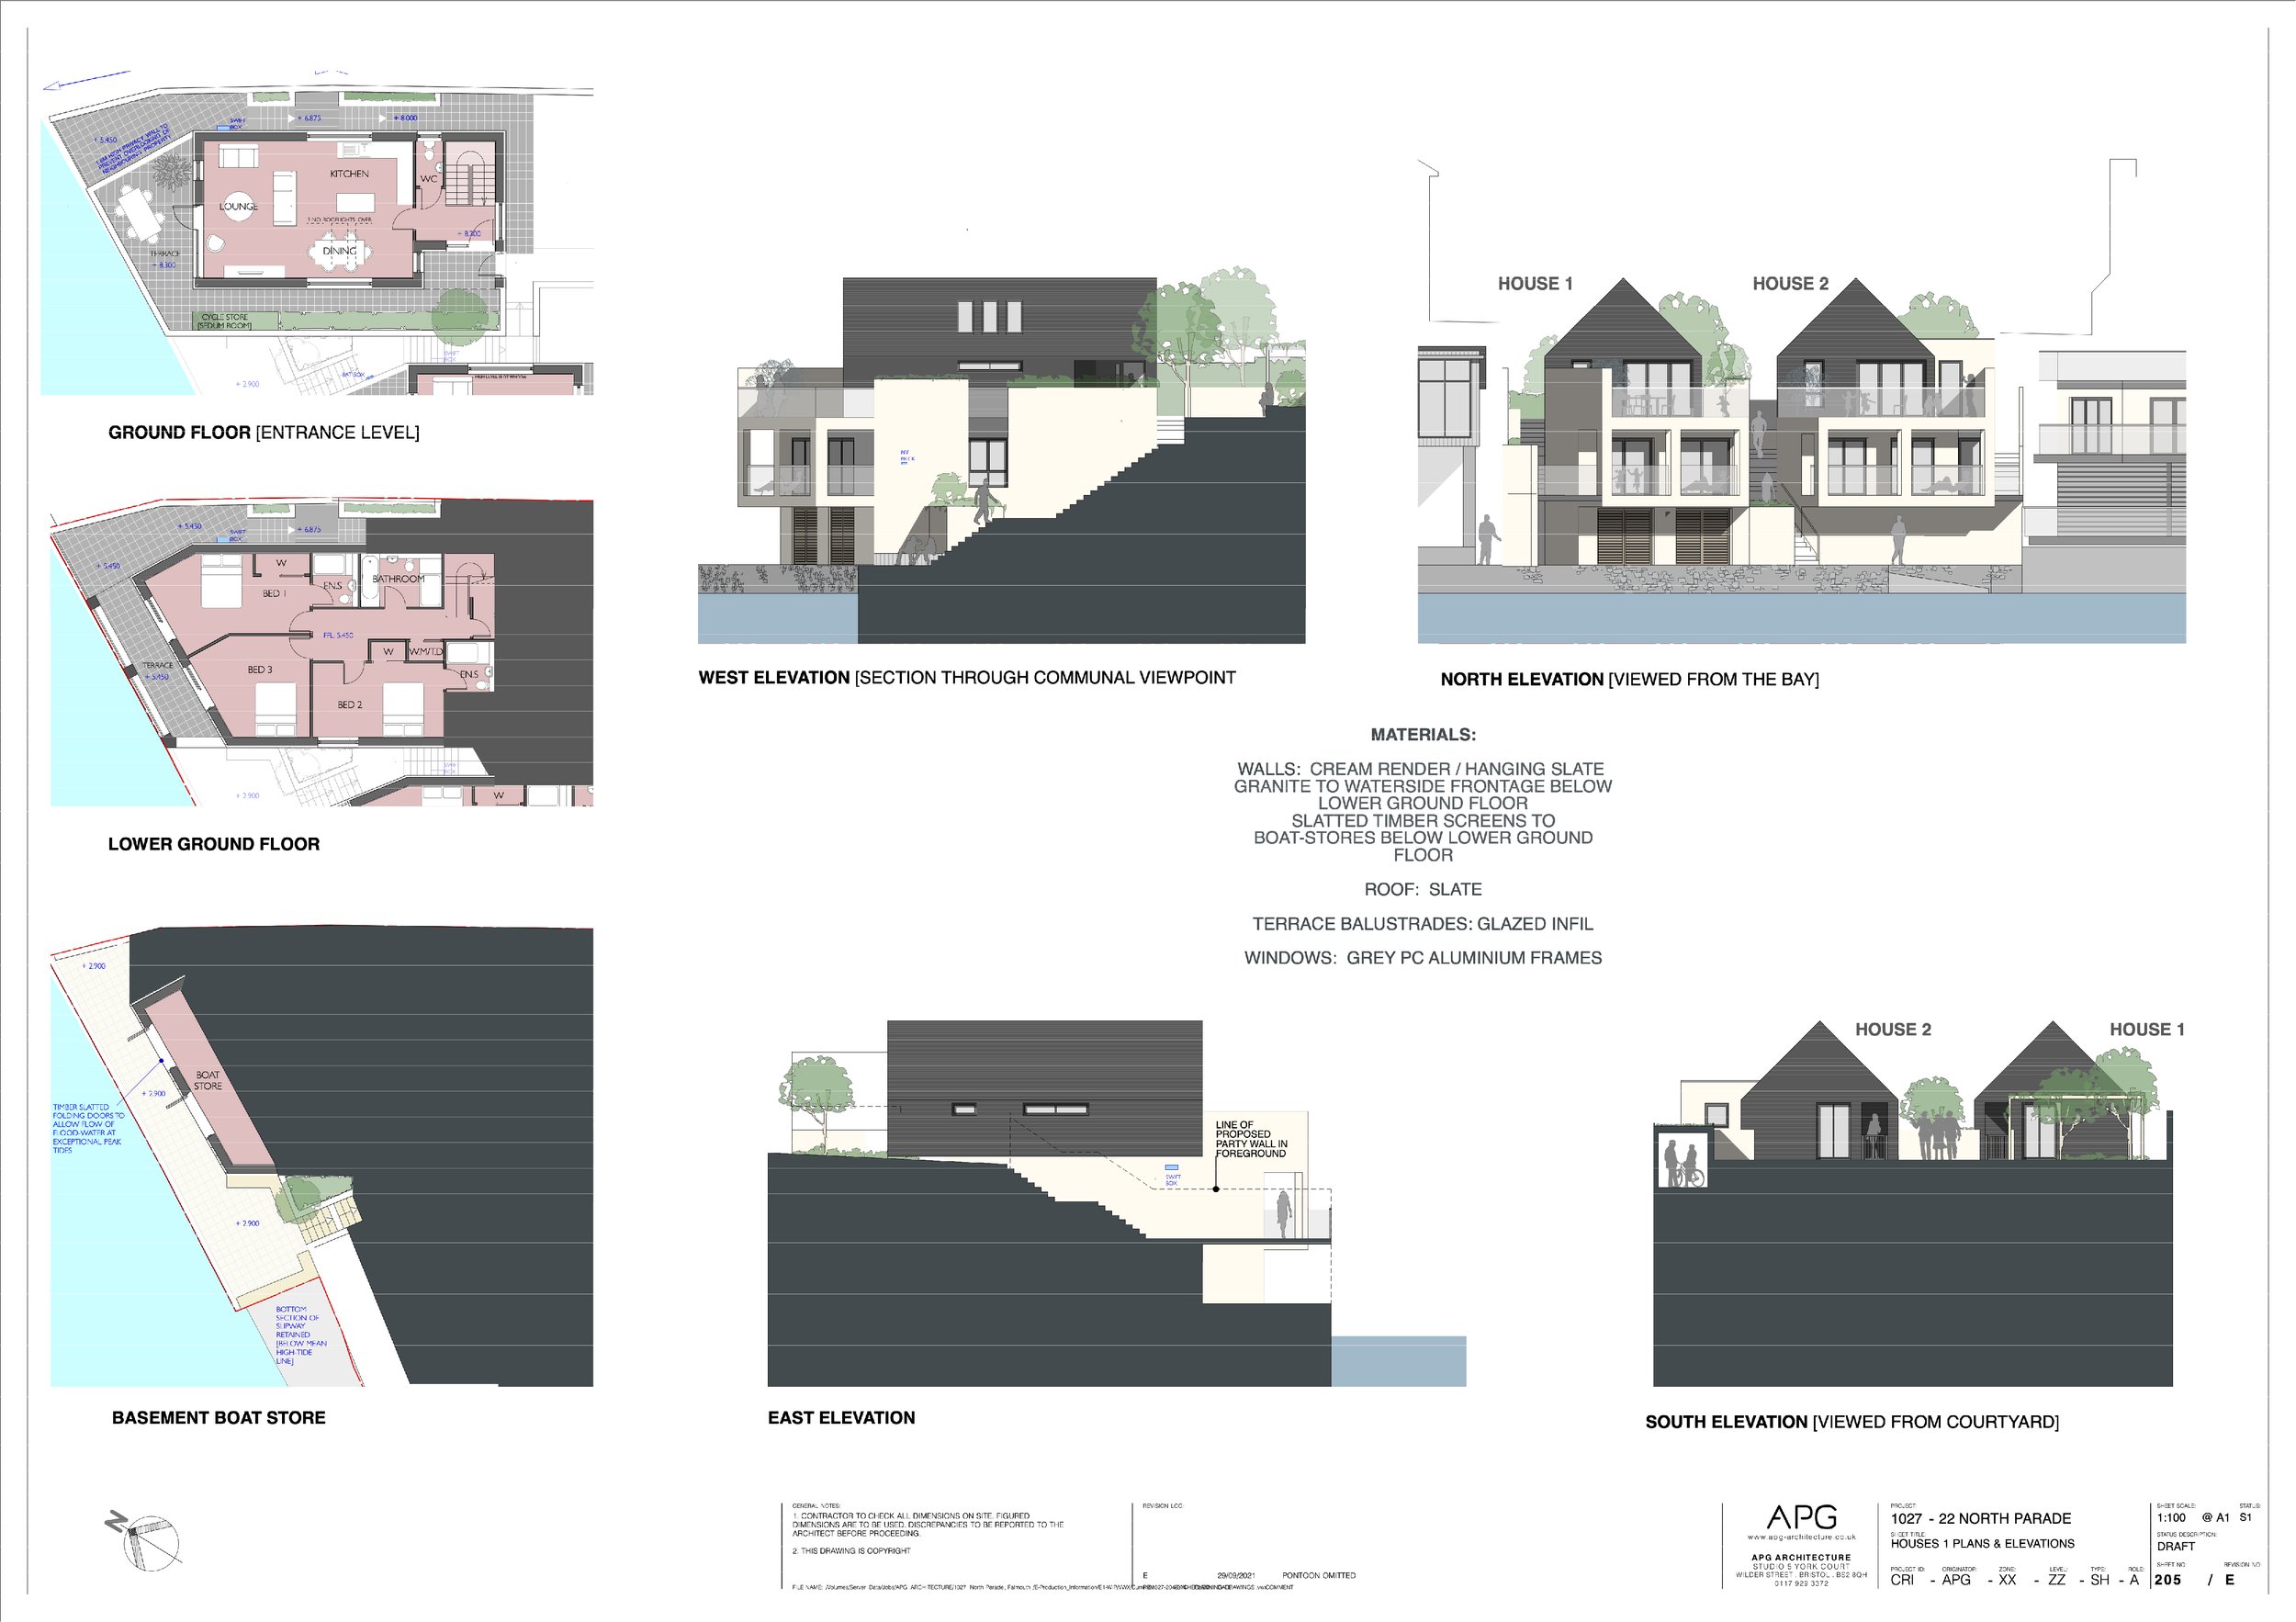 APG_Architecture_North_Parade_Falmouth_Elevations_01.jpg